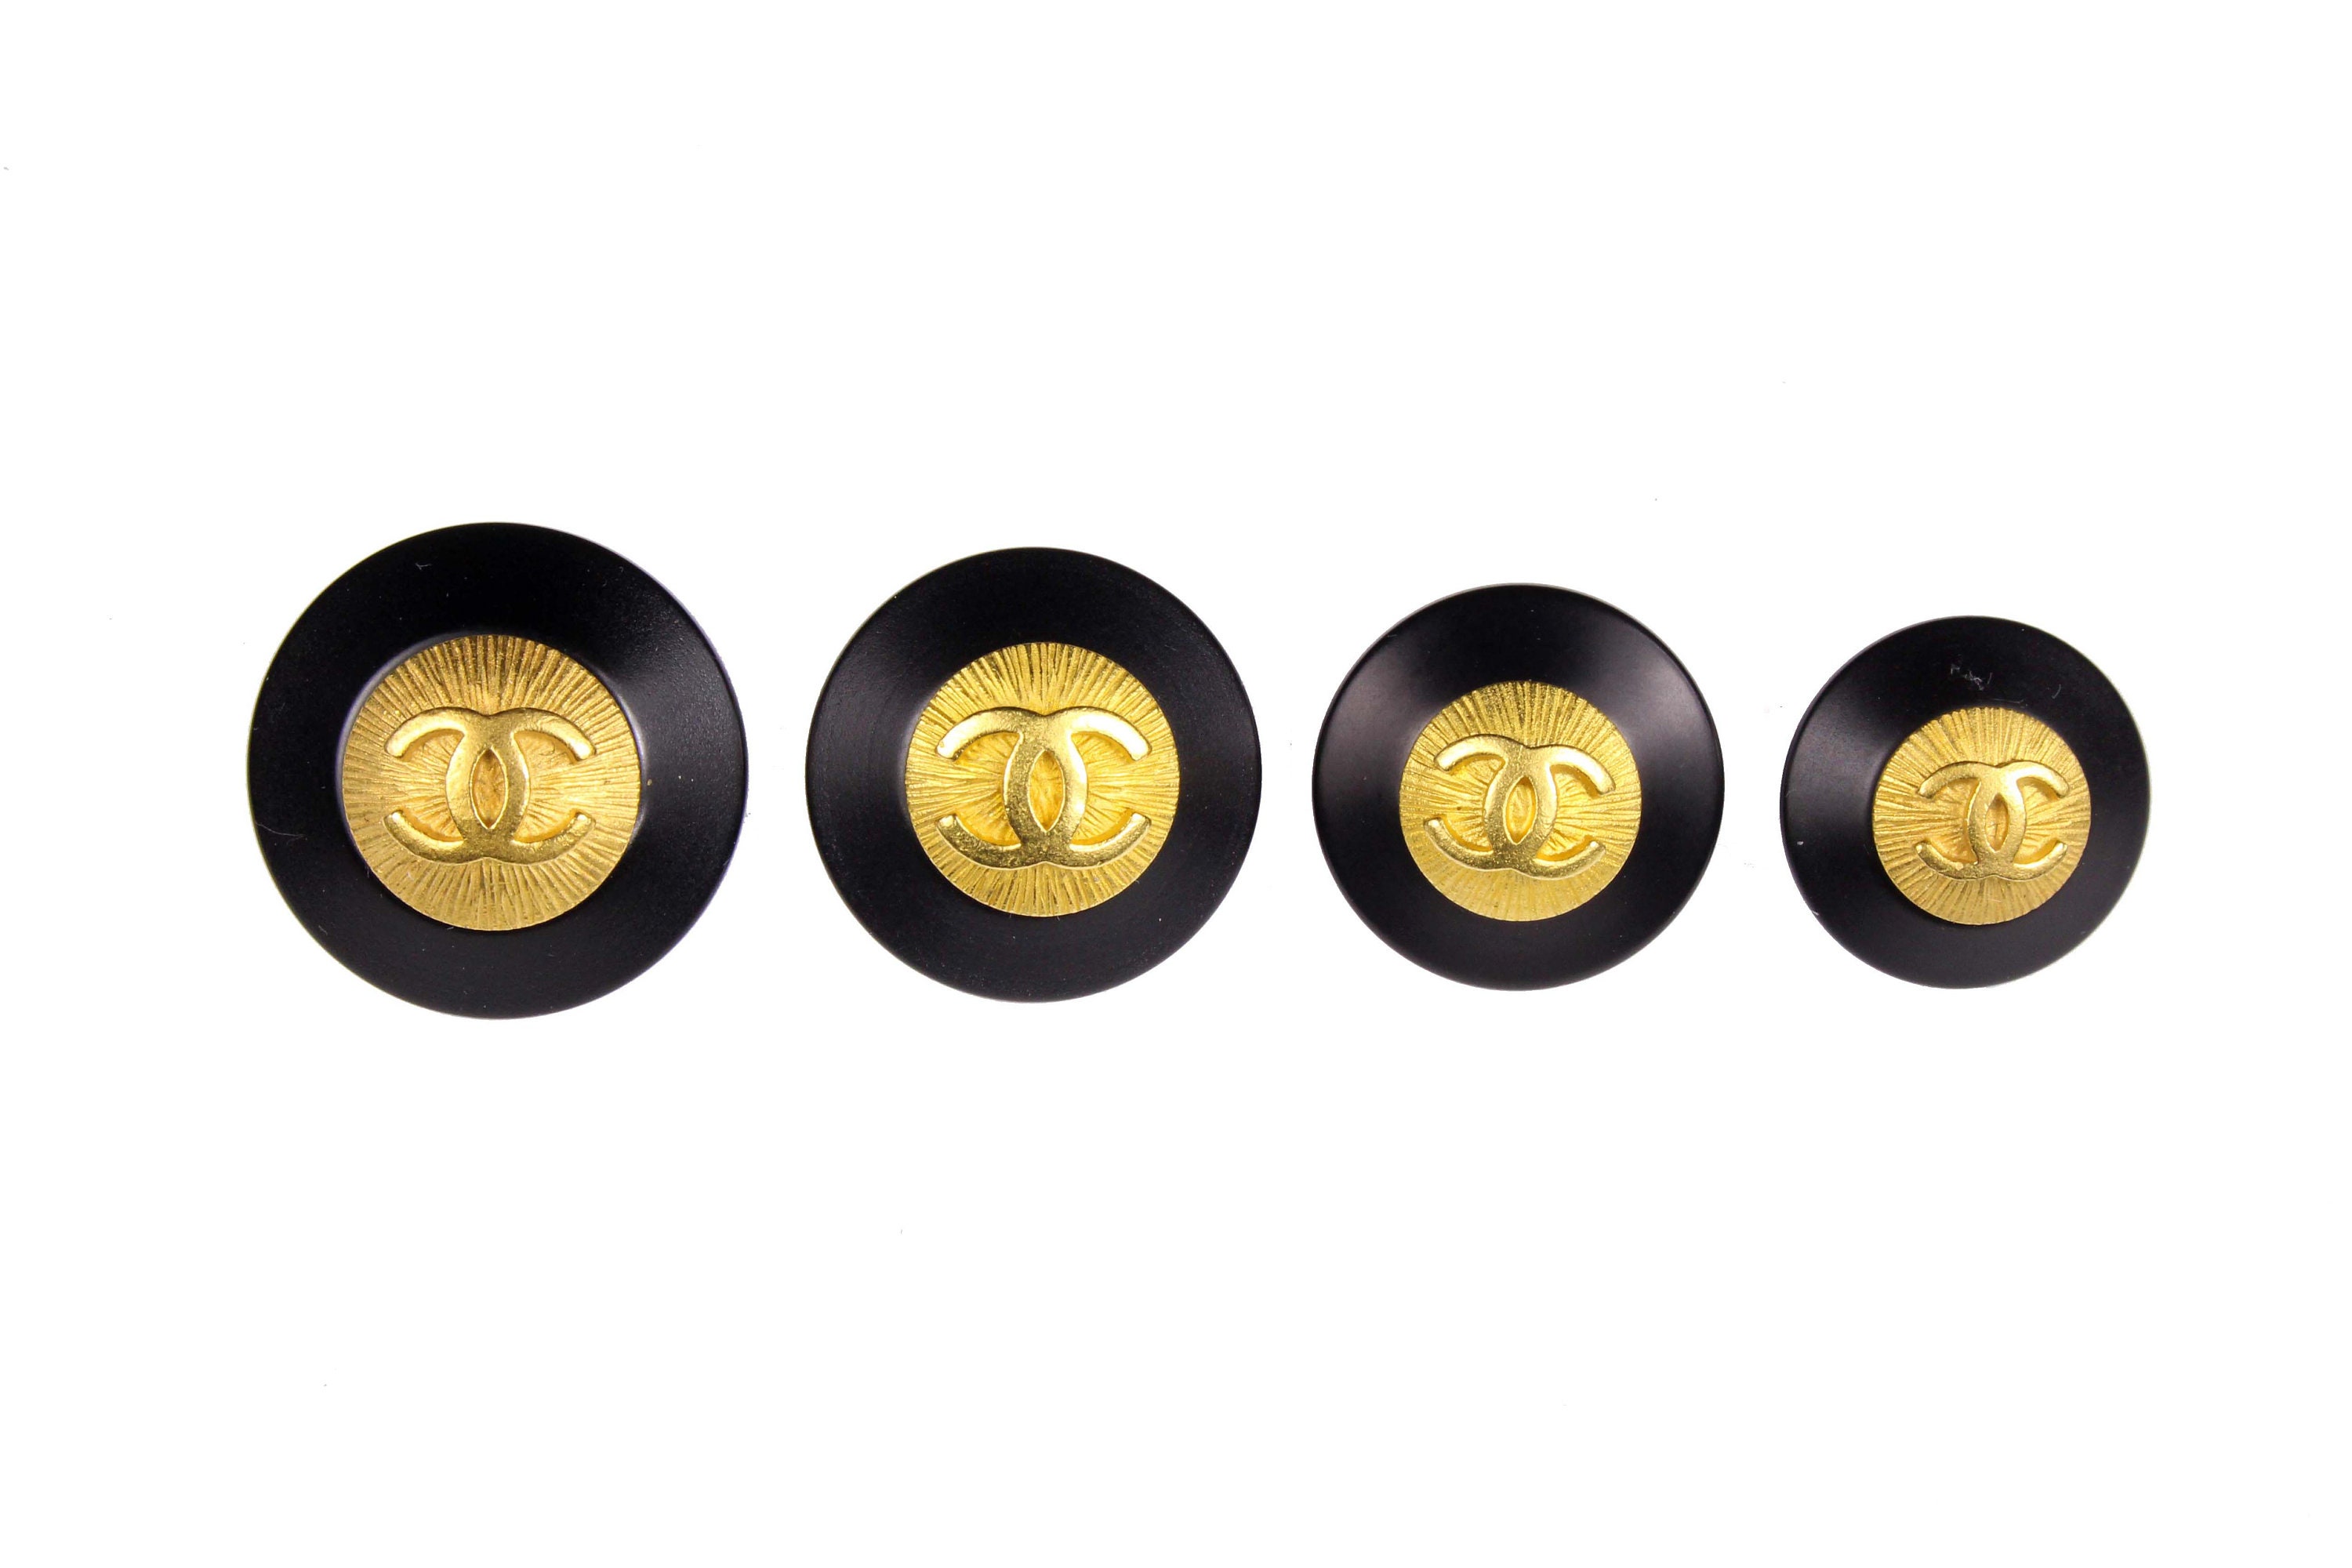 Authentic Chanel Buttons - Etsy